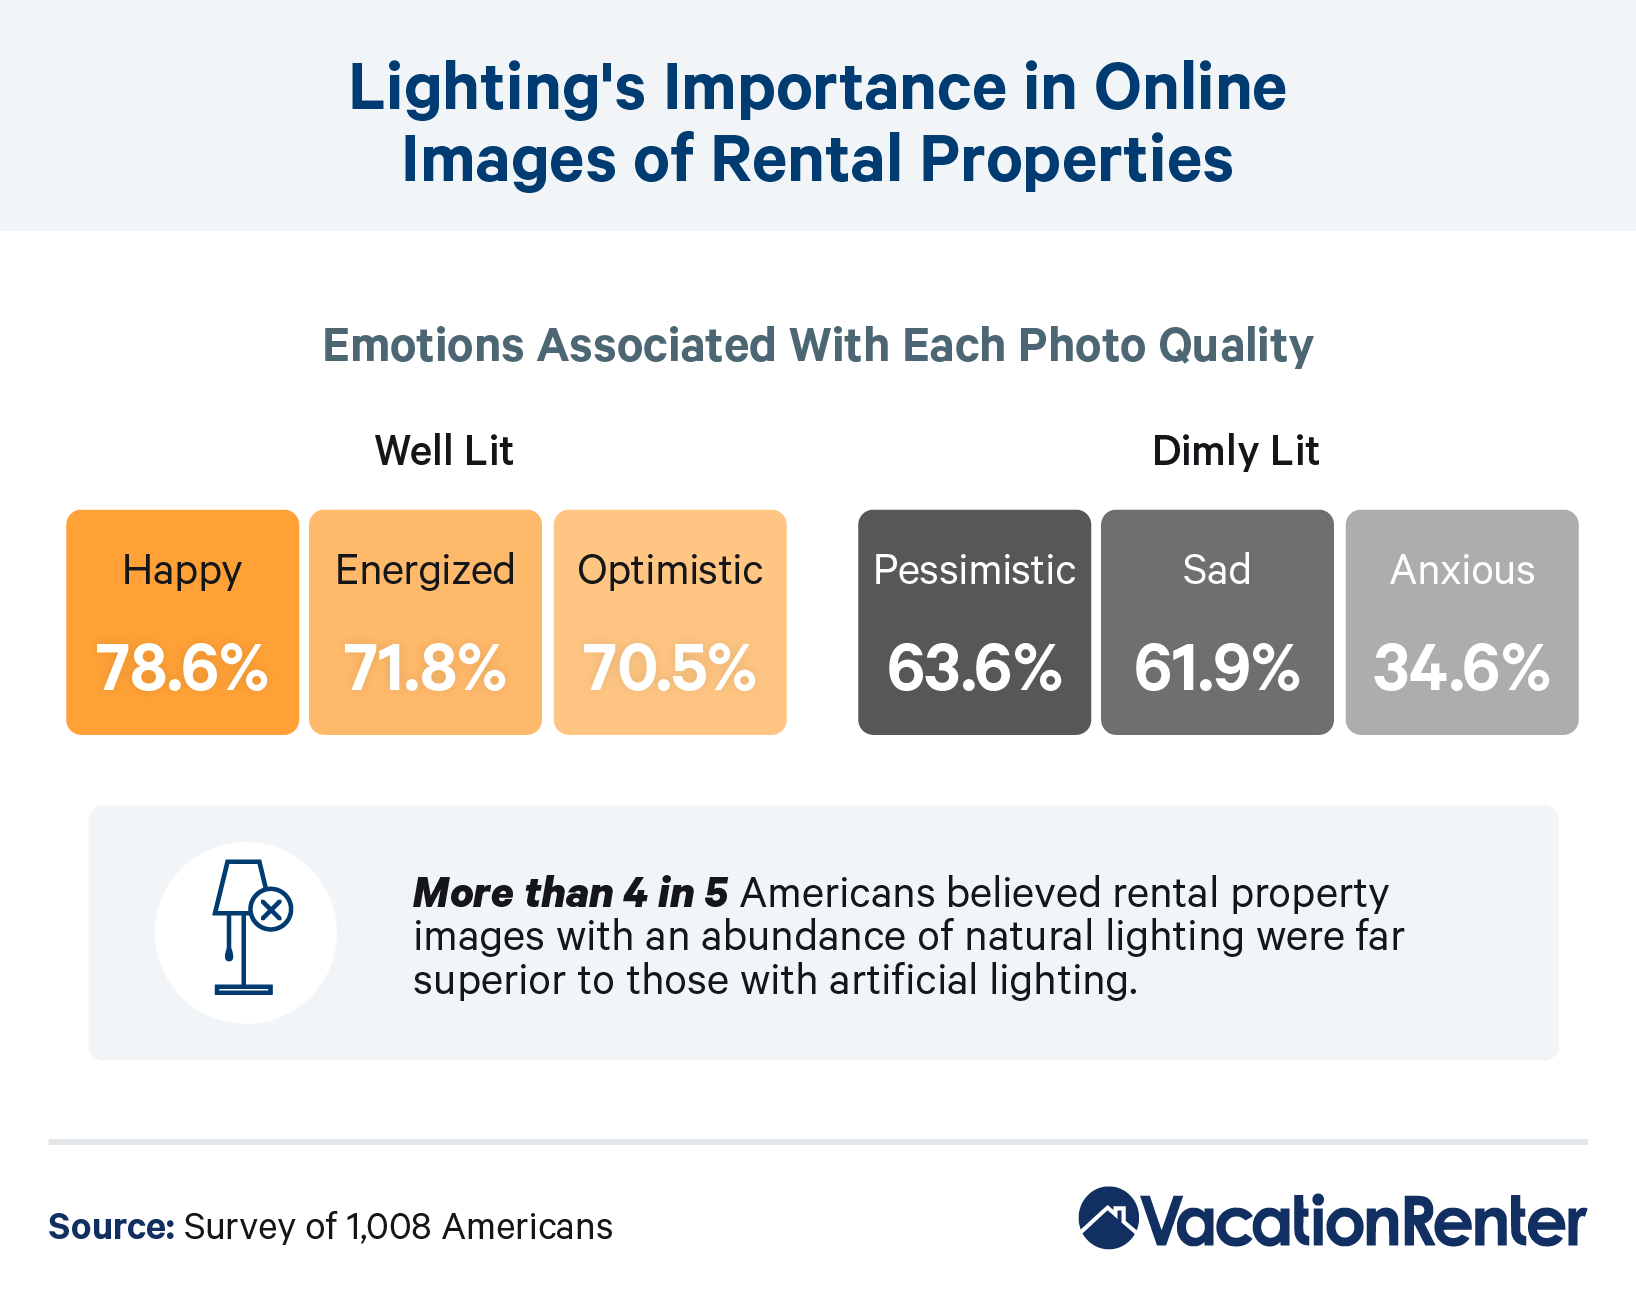 Emotions associated with lighting types for rental property images